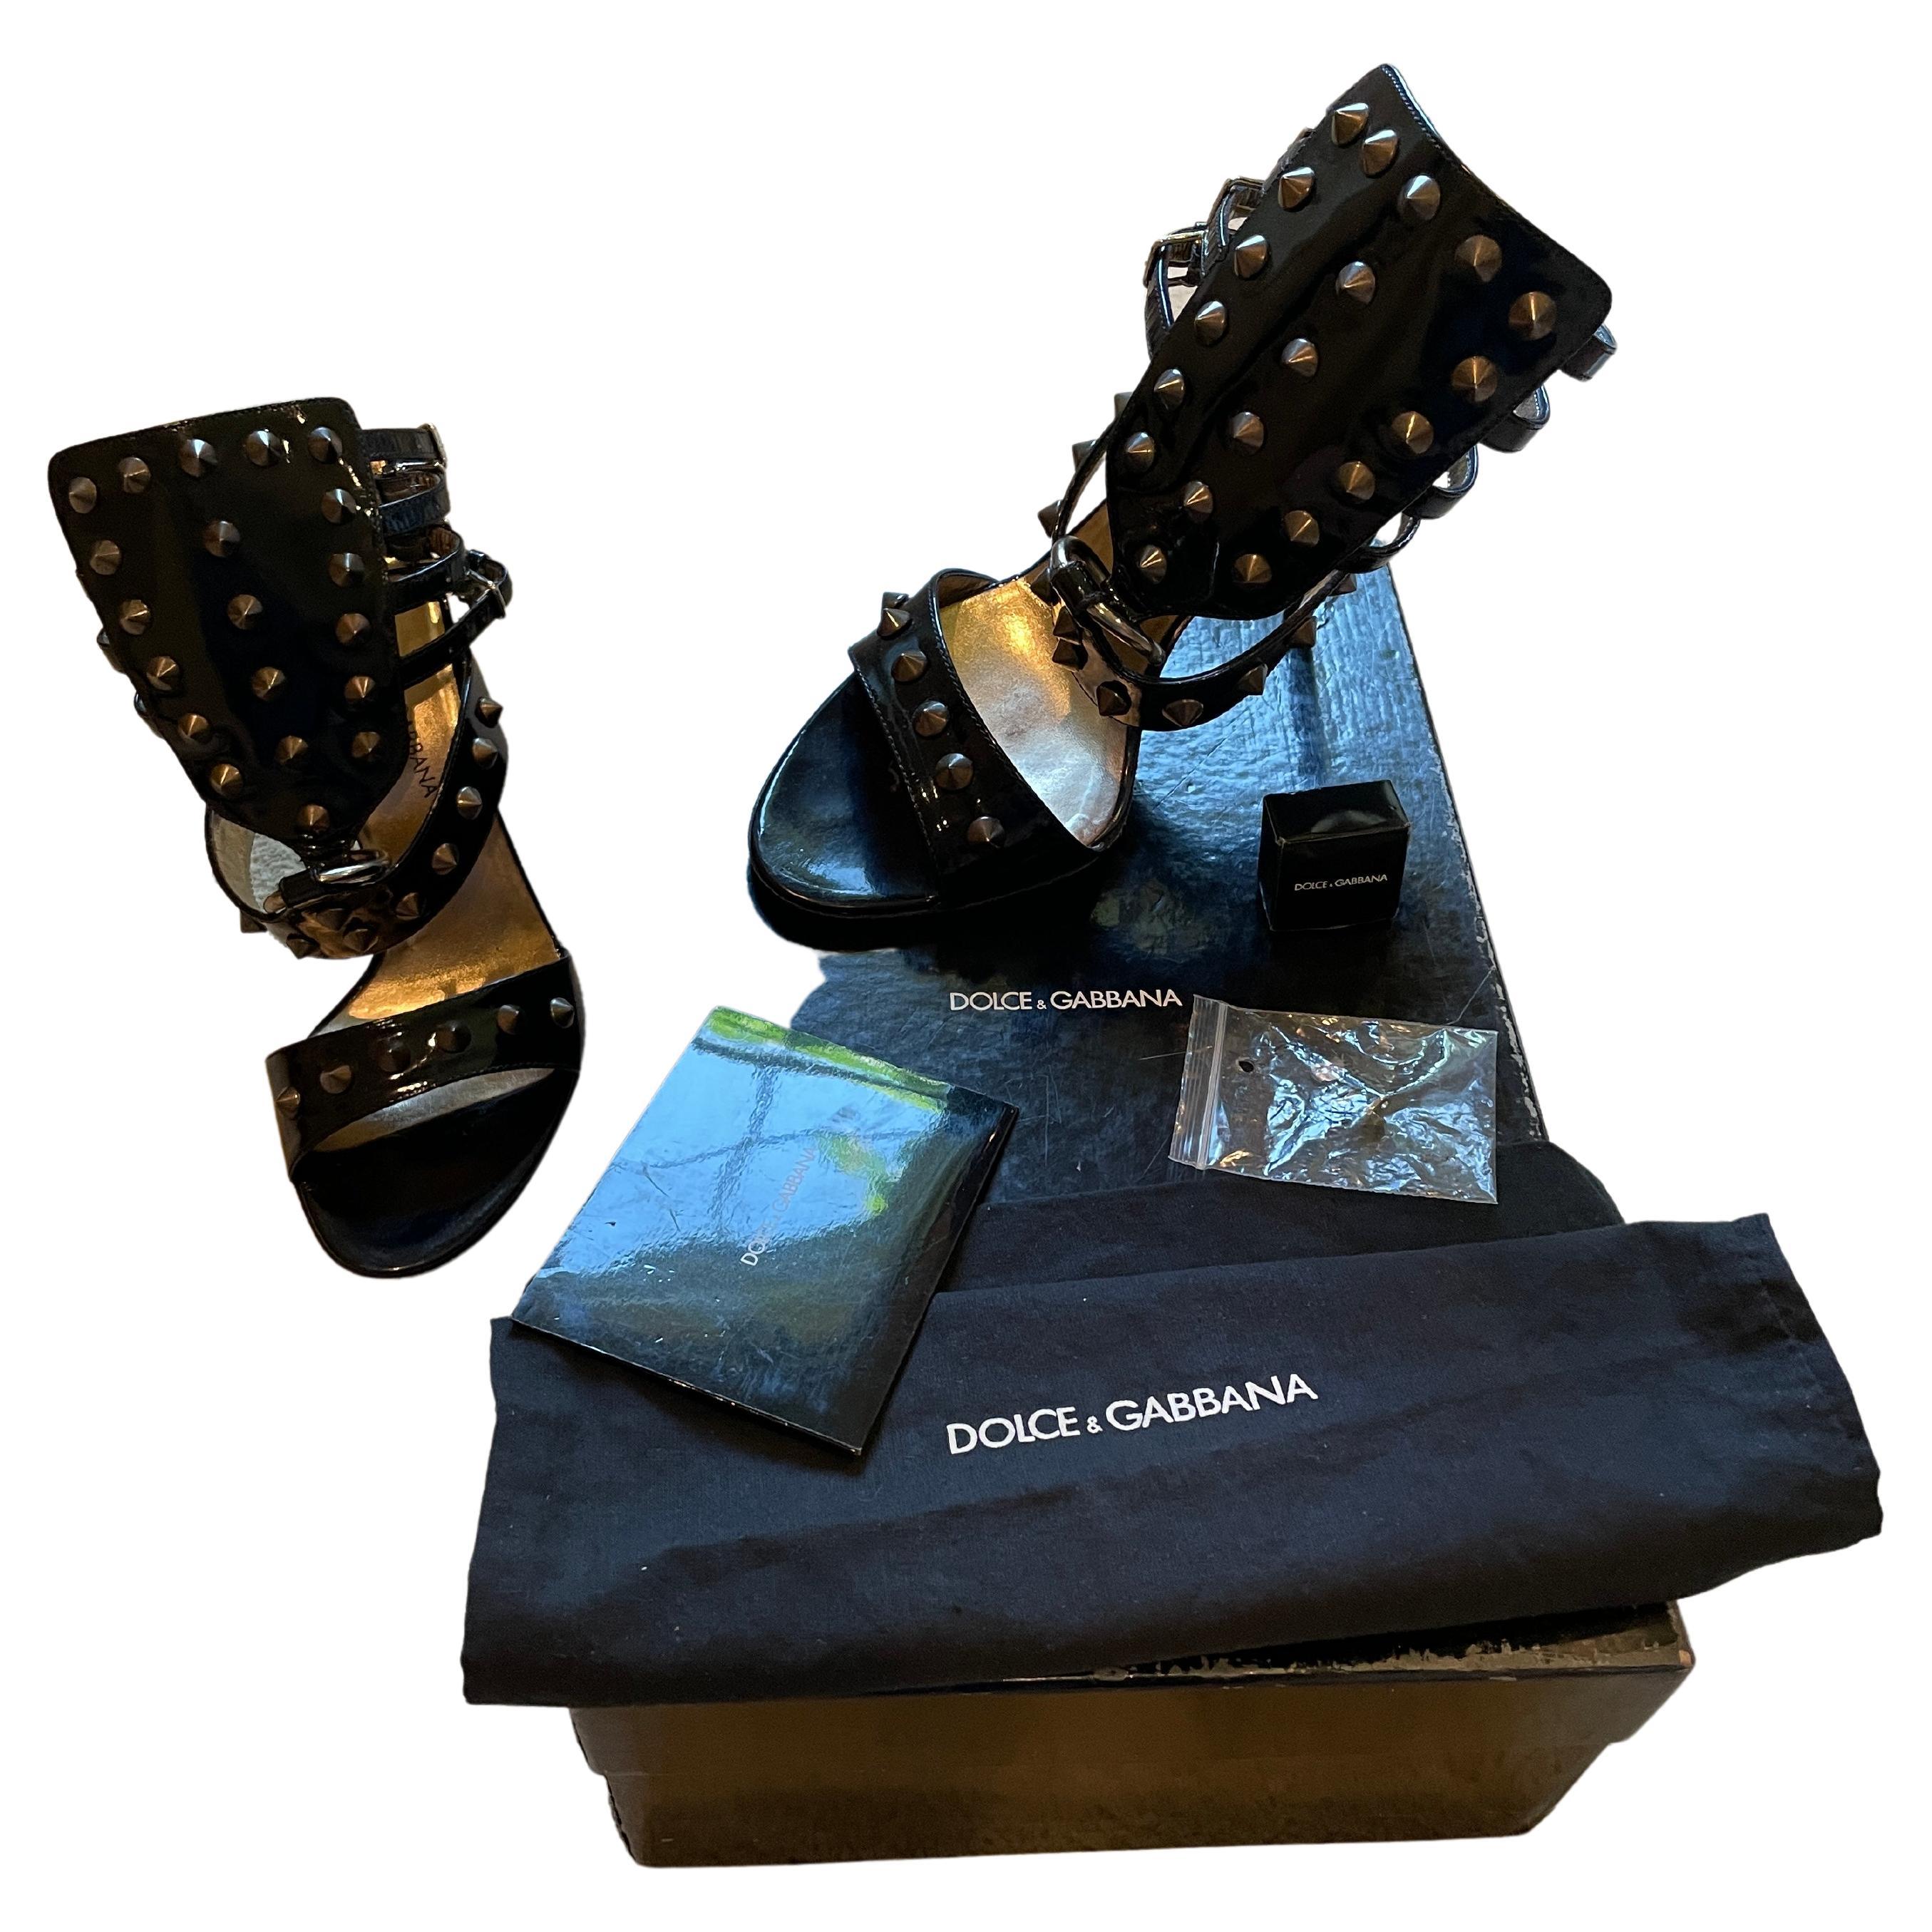 Vintage 2003 Dolce & Gabbana Runway Heels. Iconic studded stilettos from the 03 sex collection by Dolce and Gabbana. Great used condition. Wear consistent with age and usage. Labeled 37 but fits like a true 36.5 ... super comfy!!! Comes with box, 1